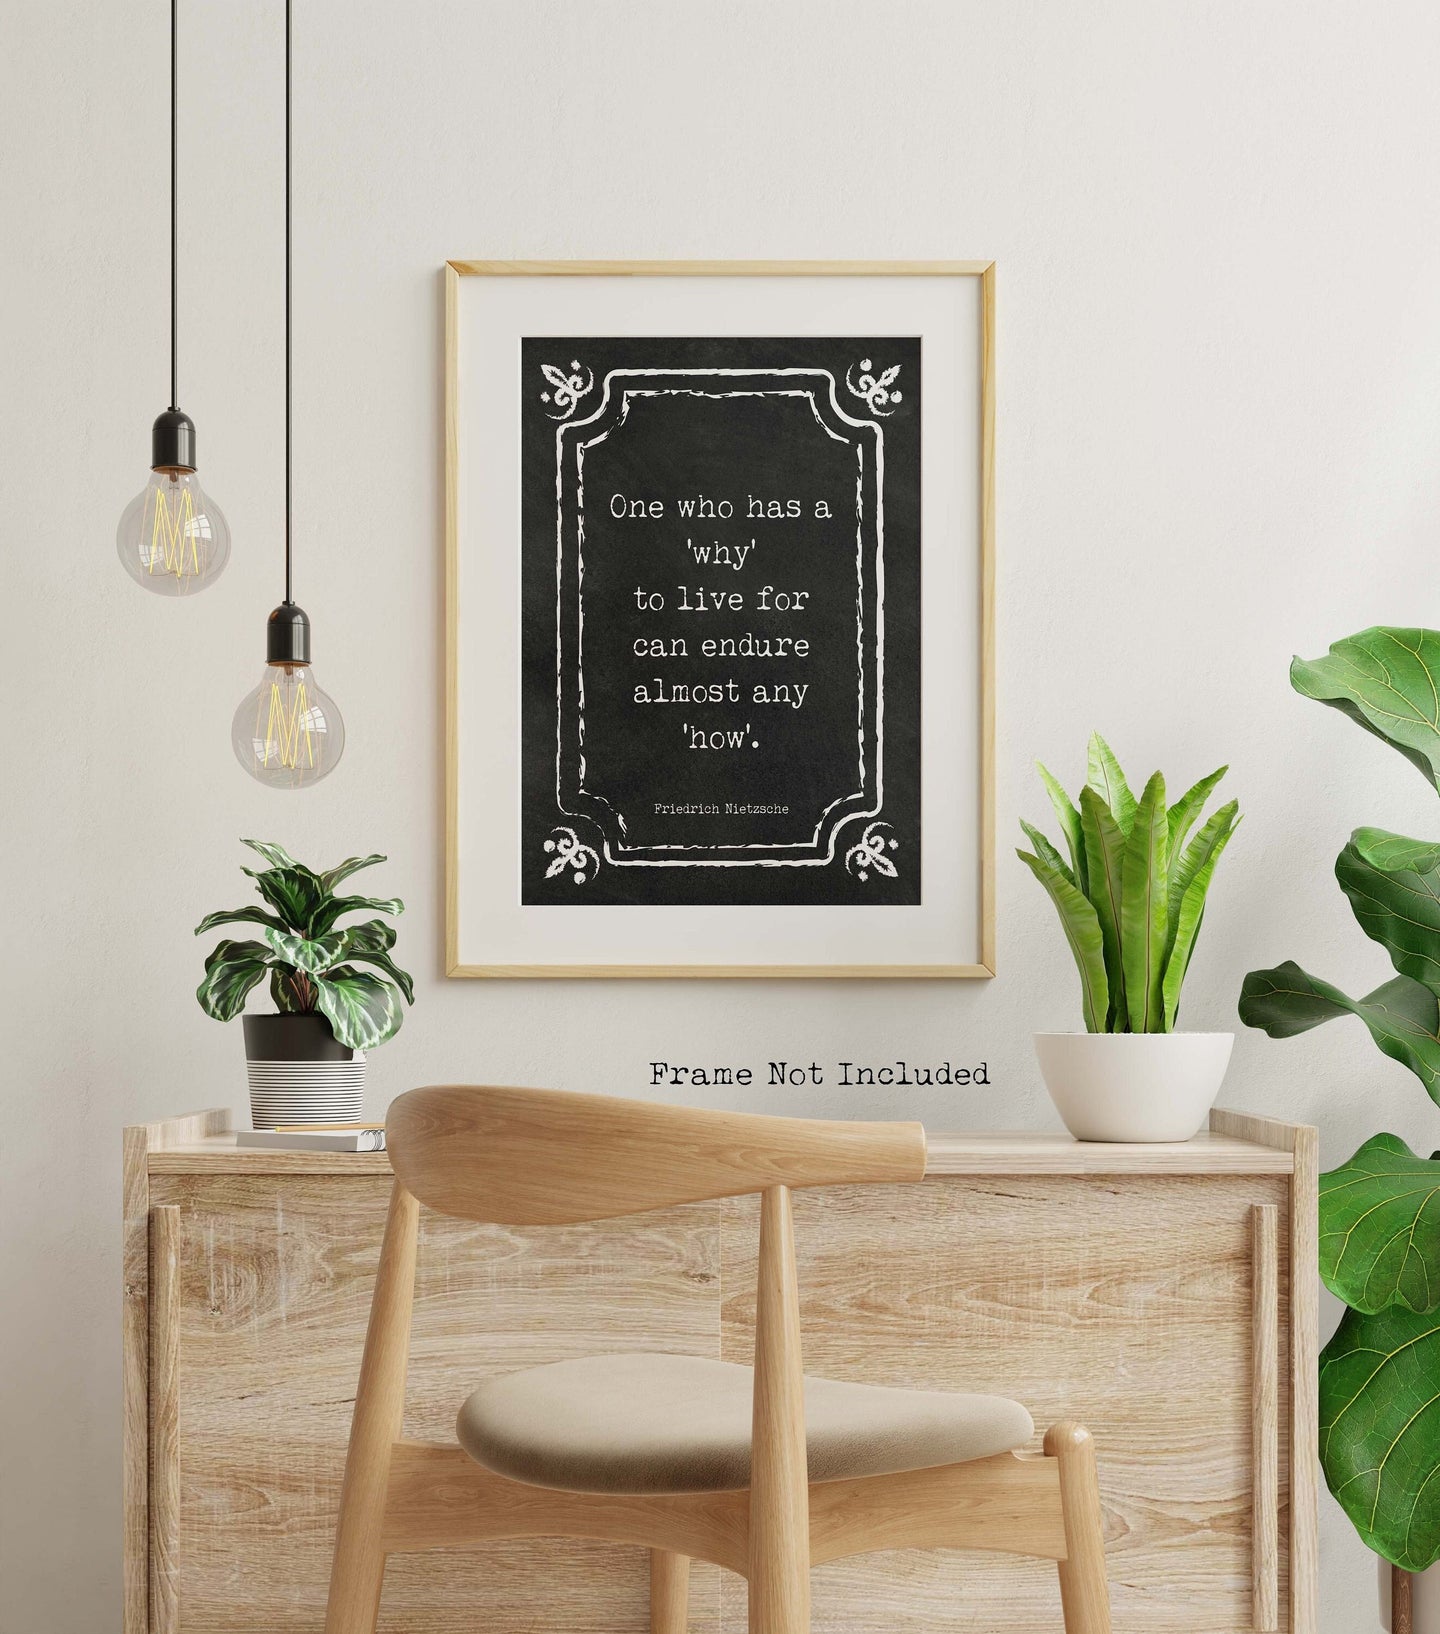 Nietzsche quote - One who has a why to live for - philosophy print - Home Office Wall Art